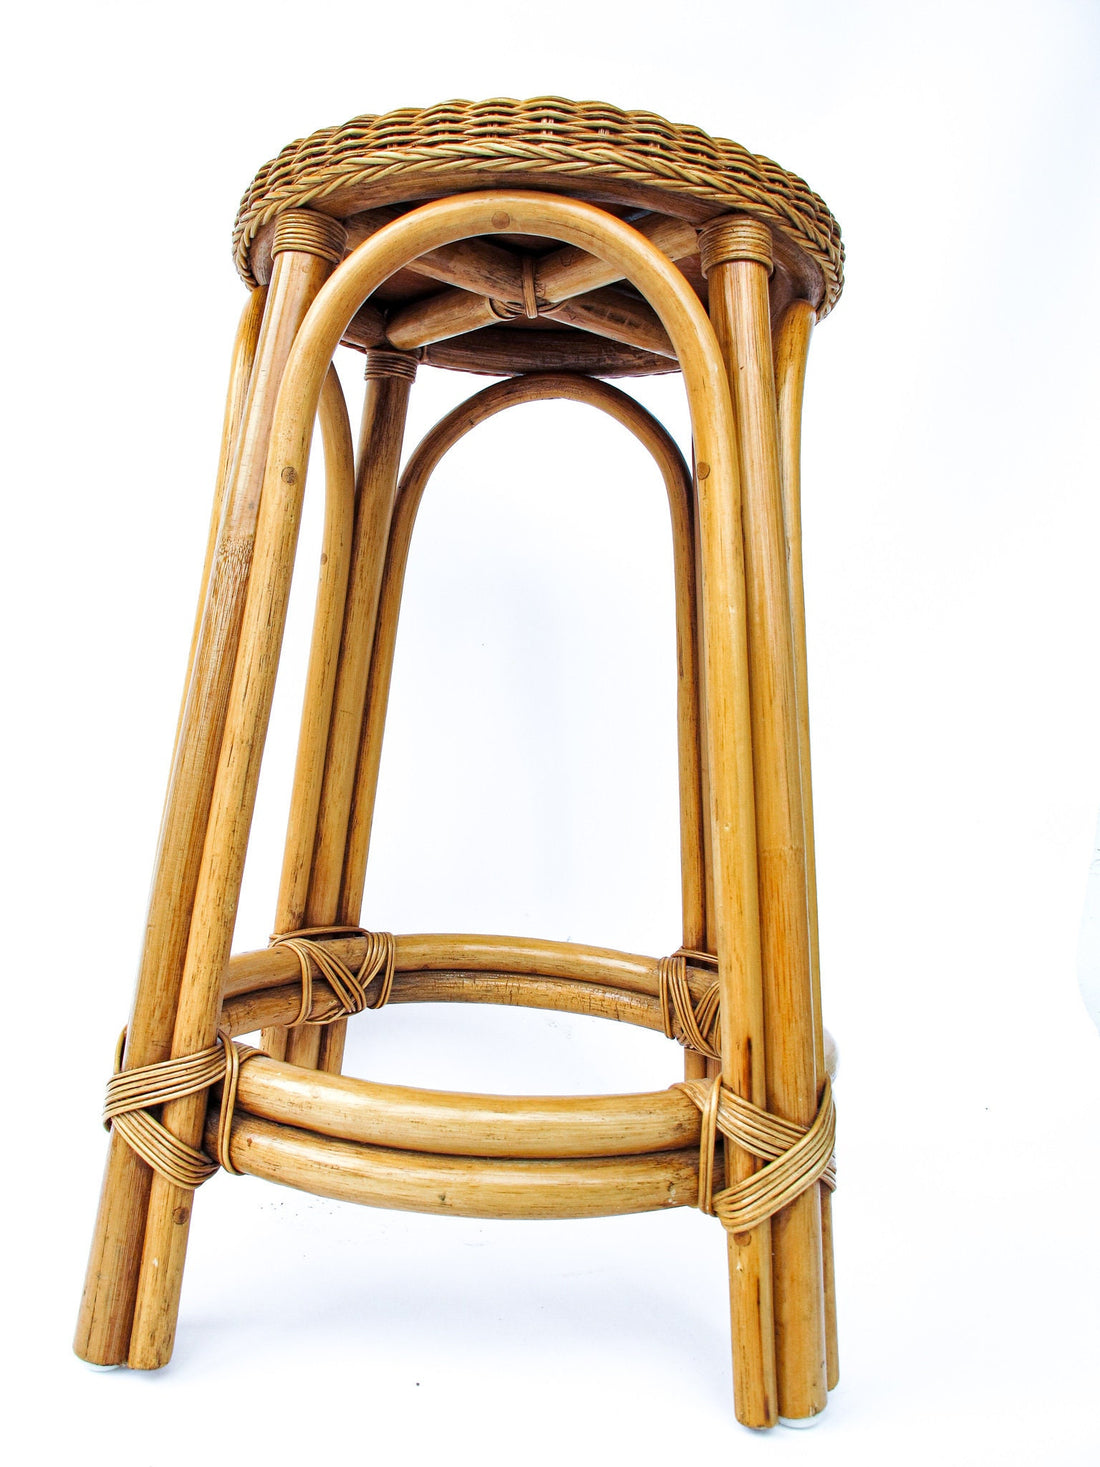 Wicker Barstool Plant Stand